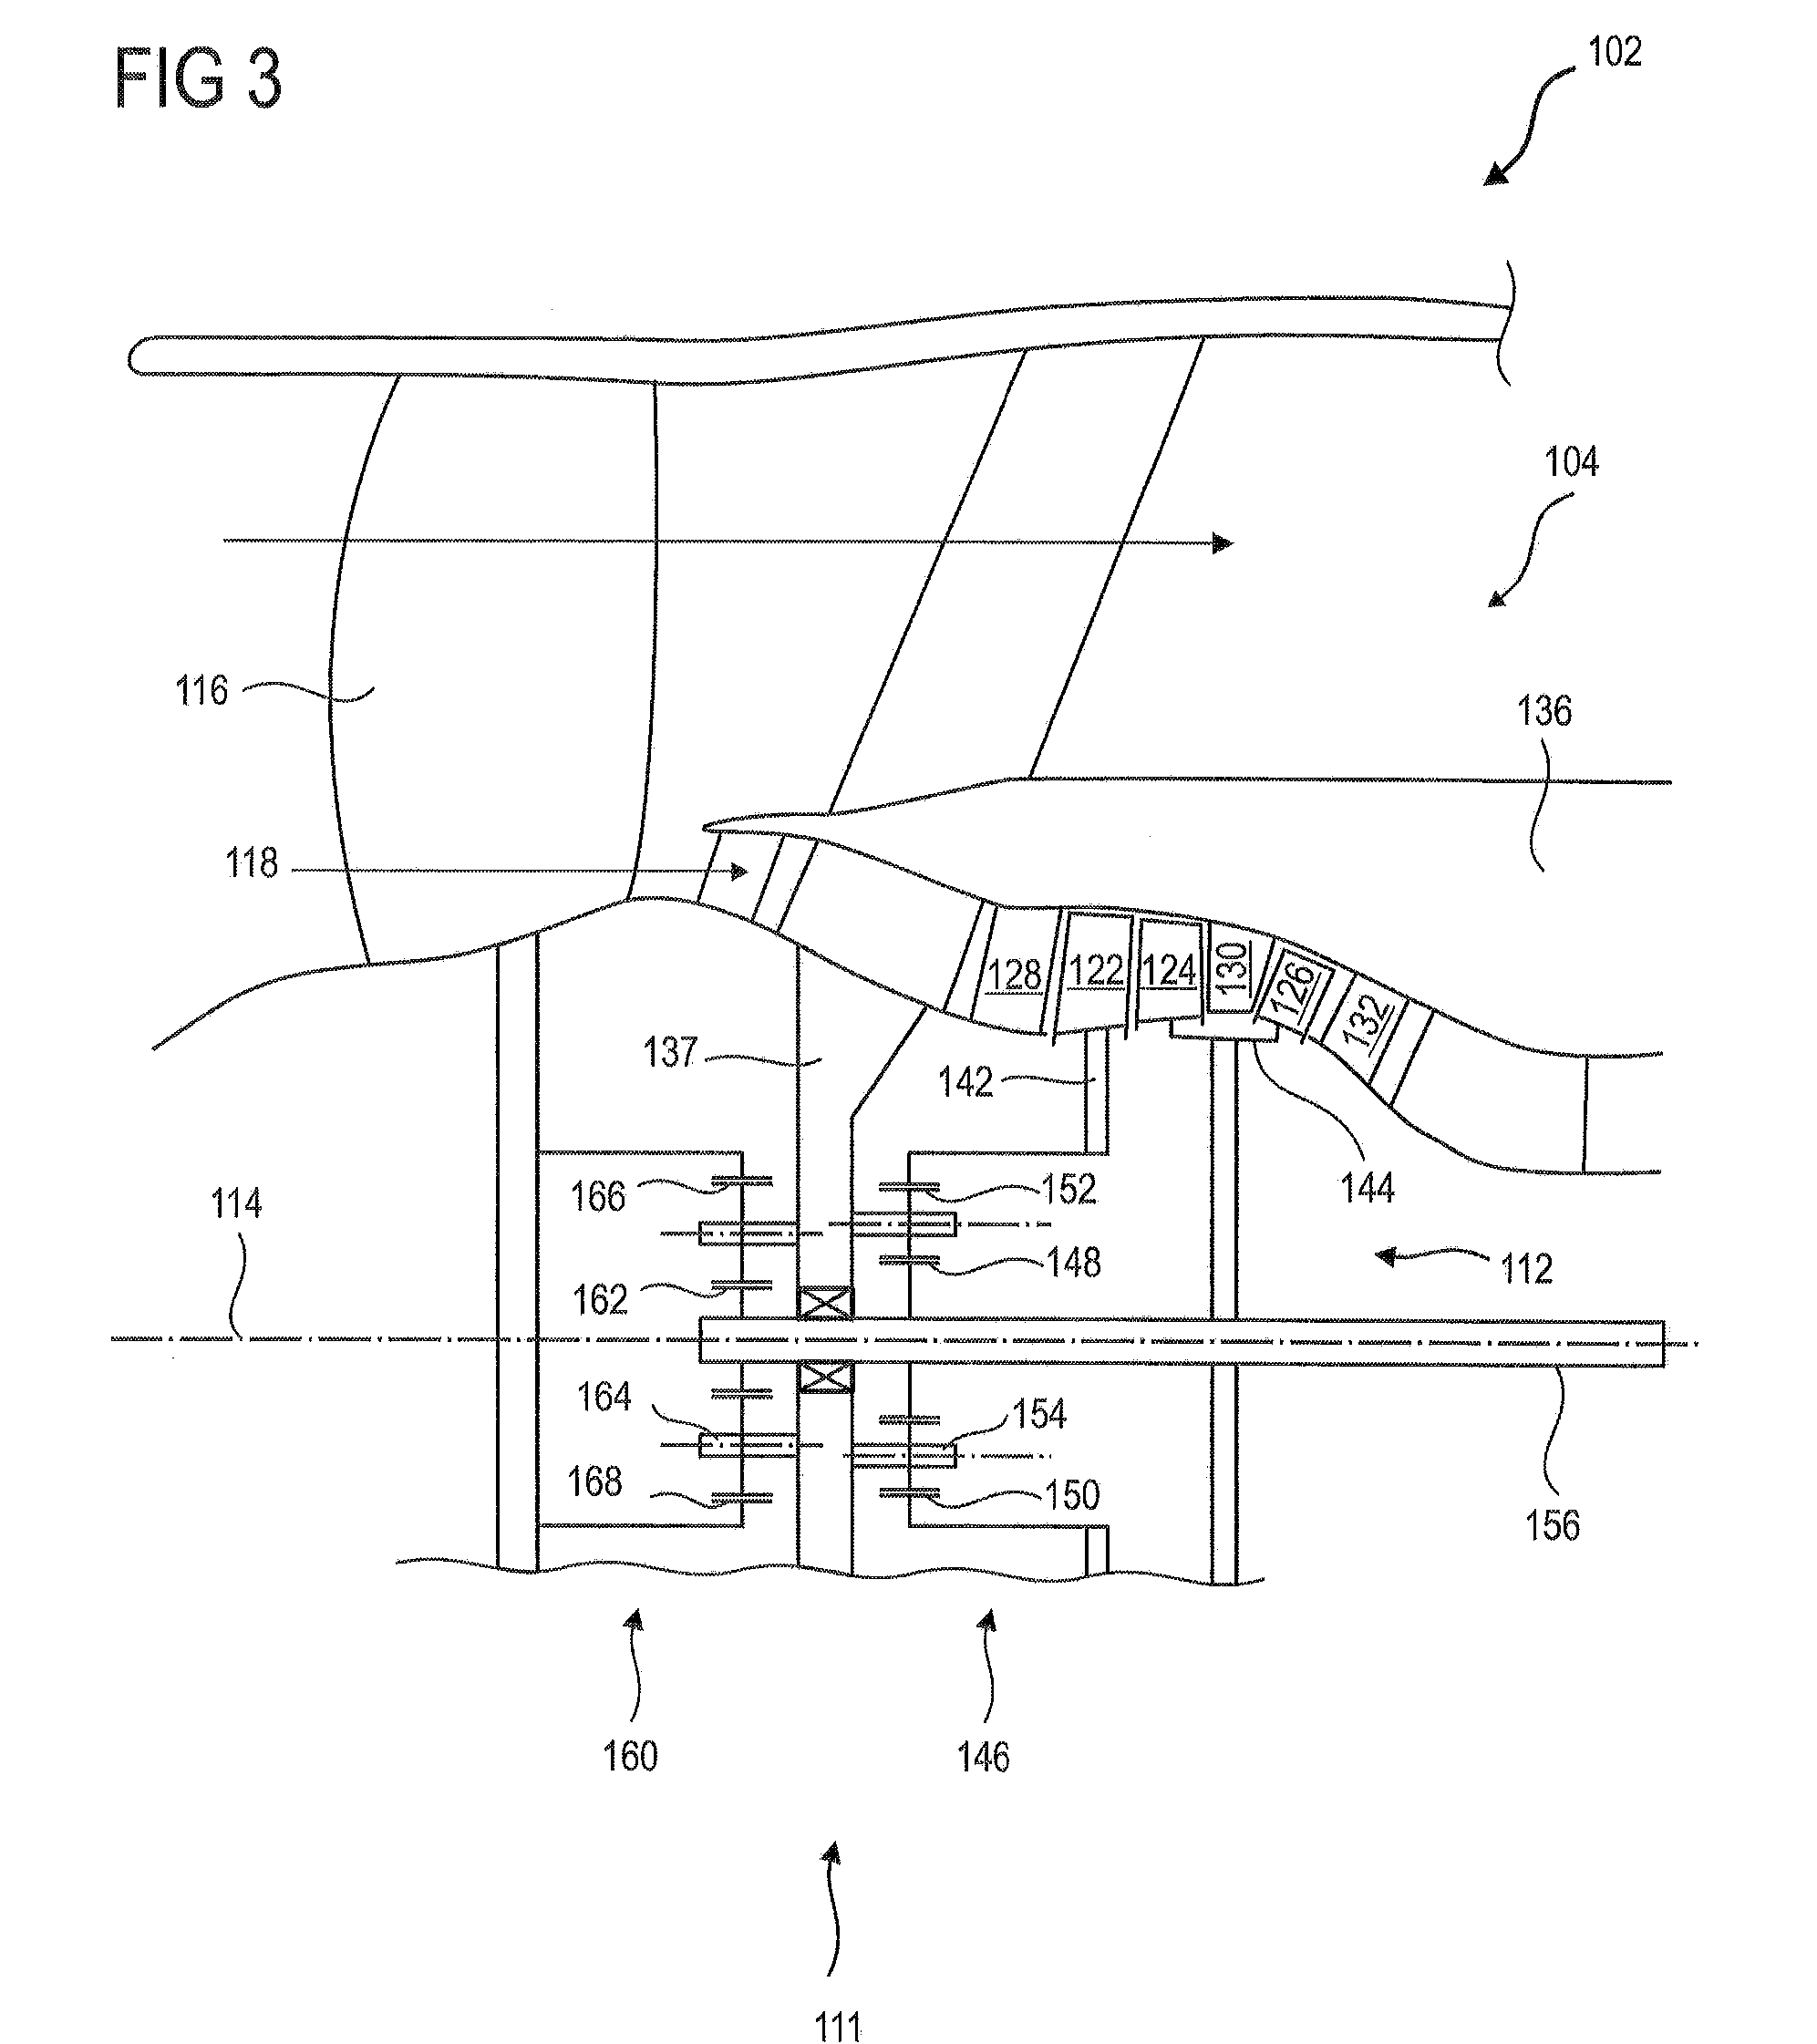 Compressor of Axial Turbine Engine with Contra-Rotating Rotor